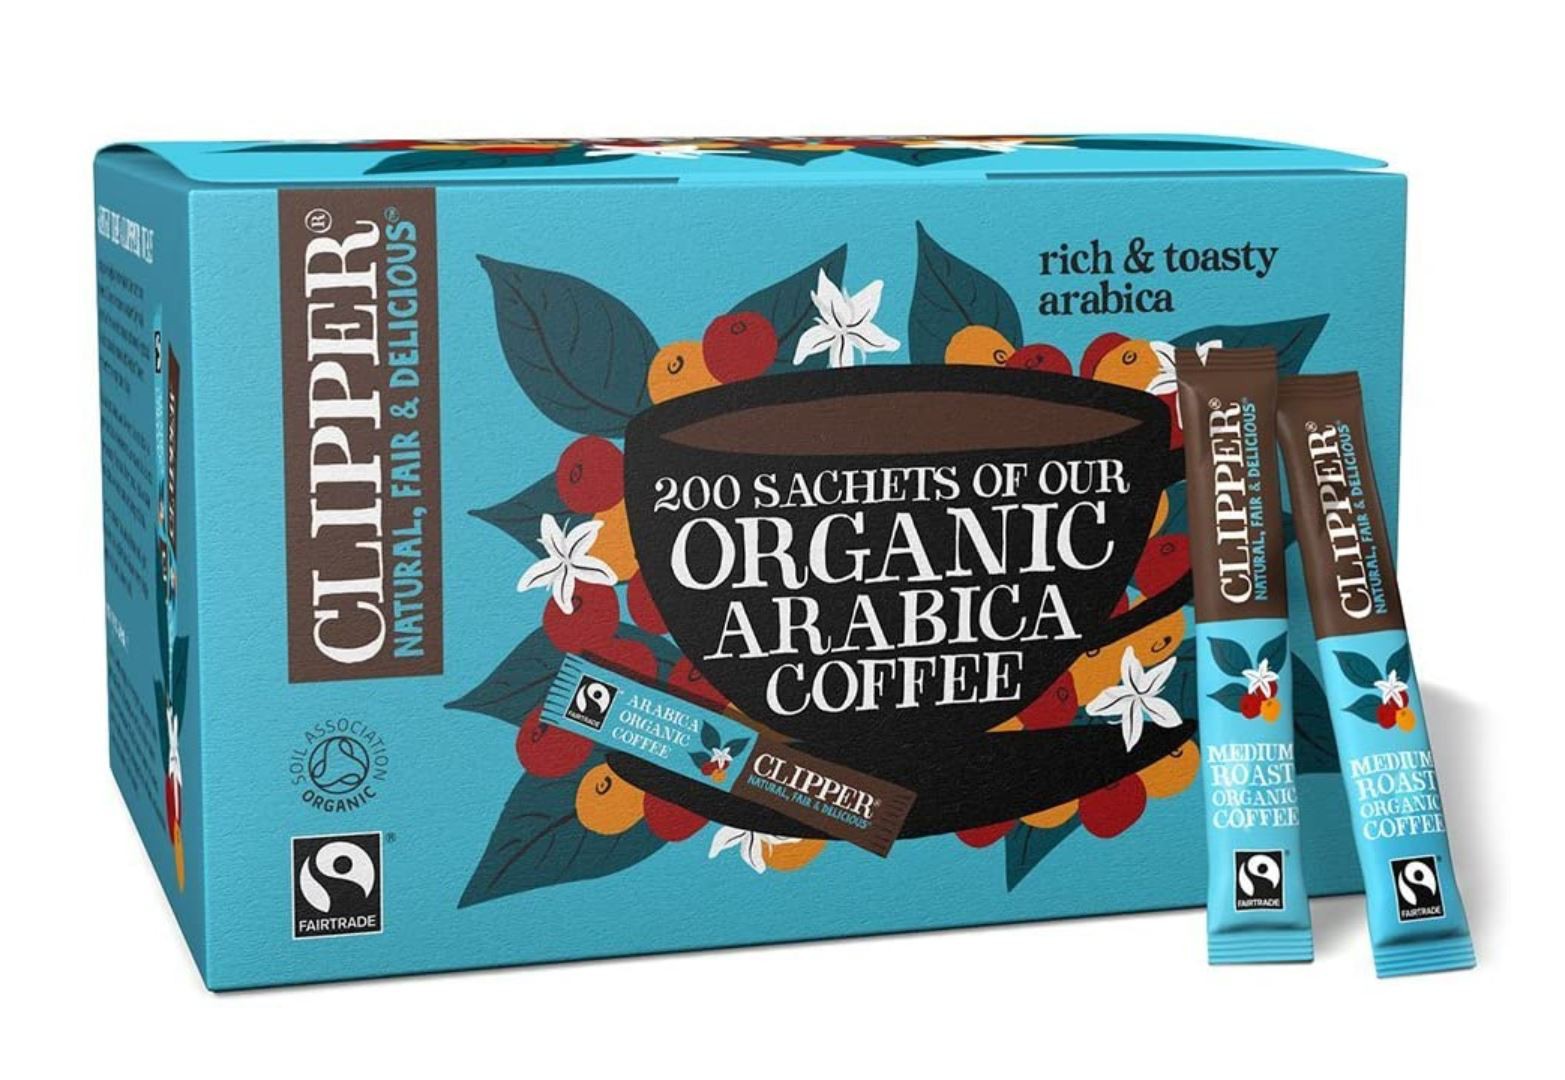 Clipper+Organic+and+FairTrade+Arabica+Coffee+Sachets+%28Pack+of+200%29